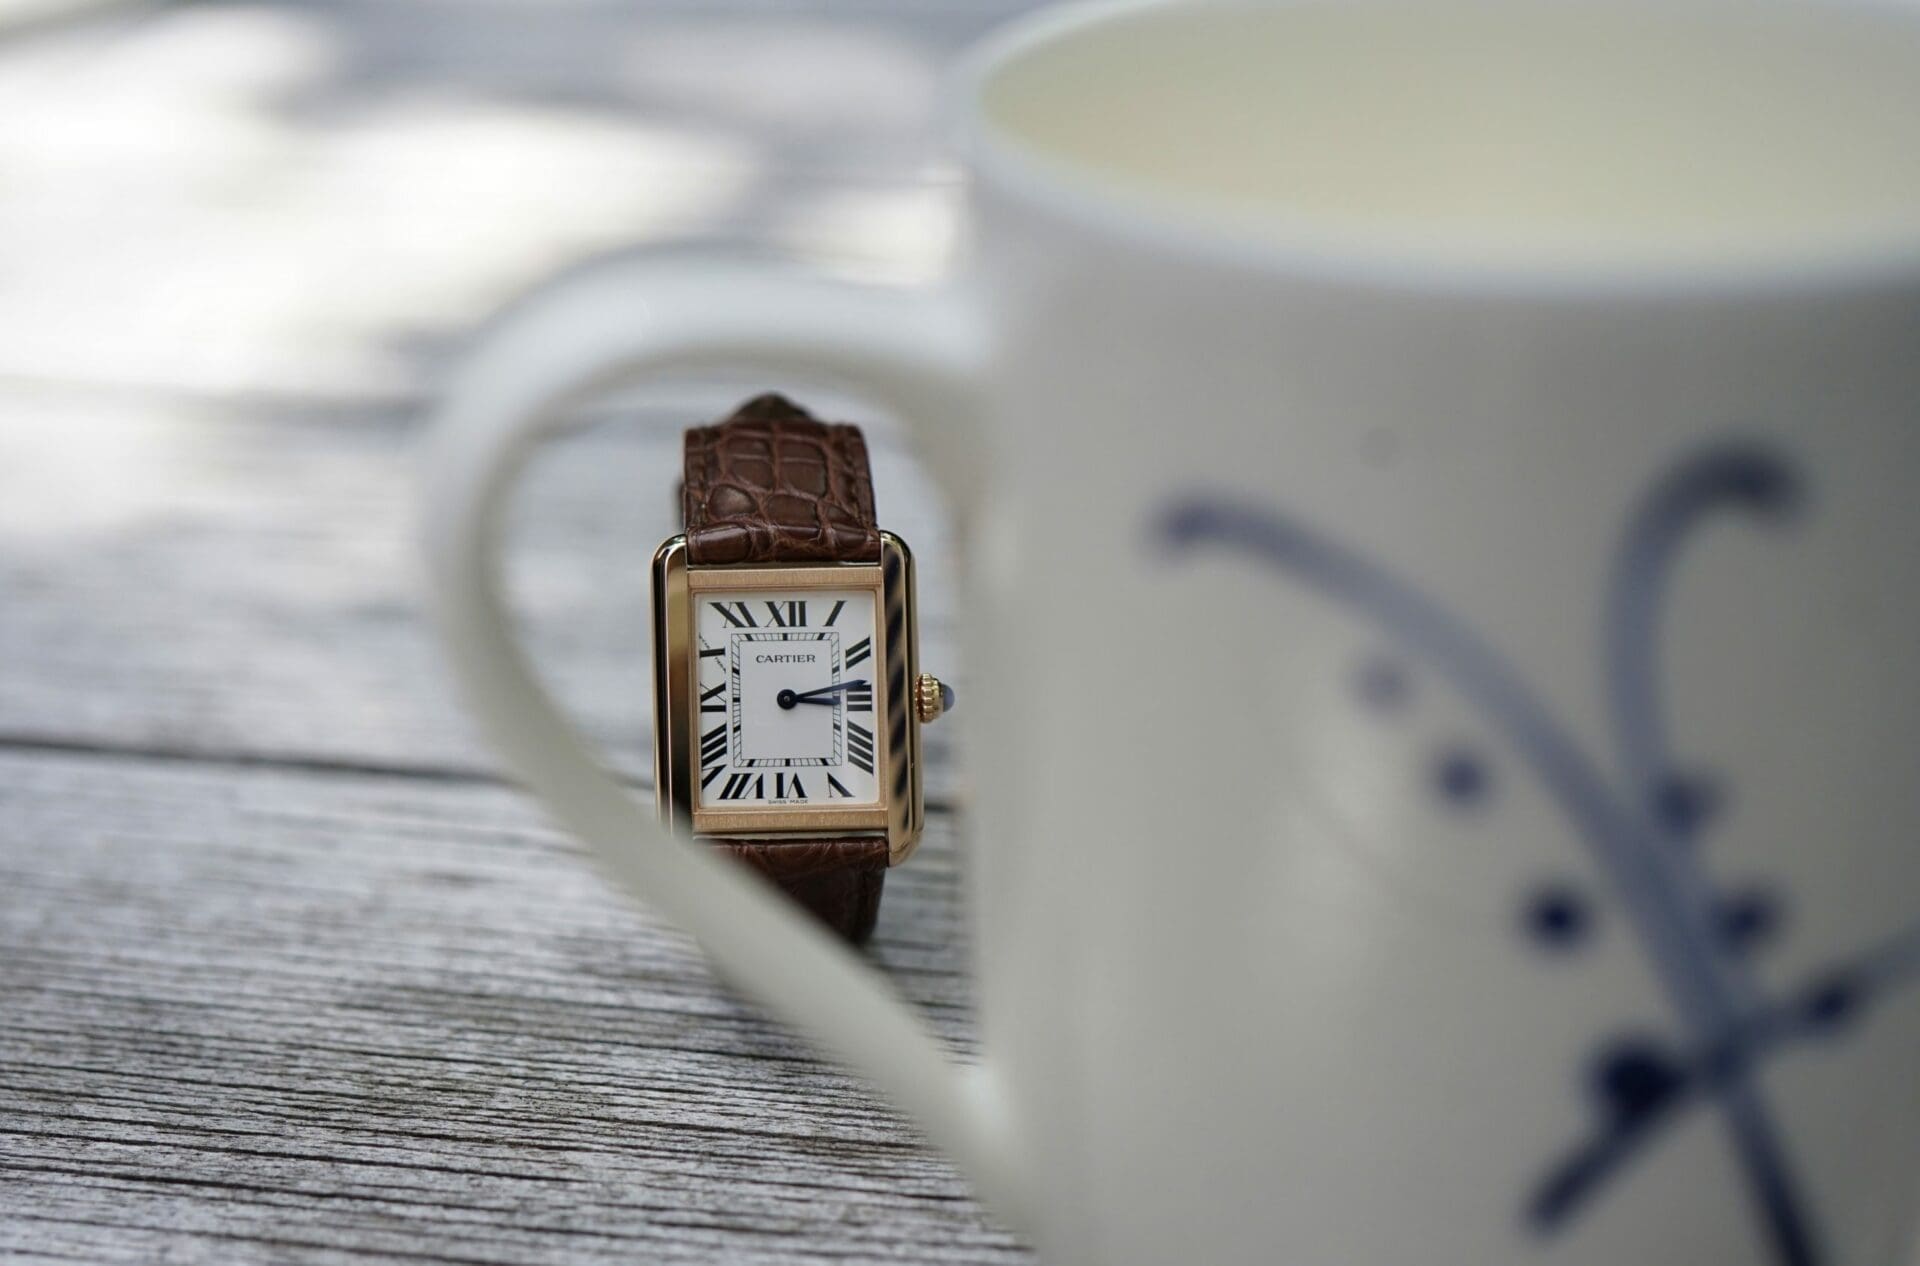 WHO TO FOLLOW: @therubyhour and her amazing watch stories